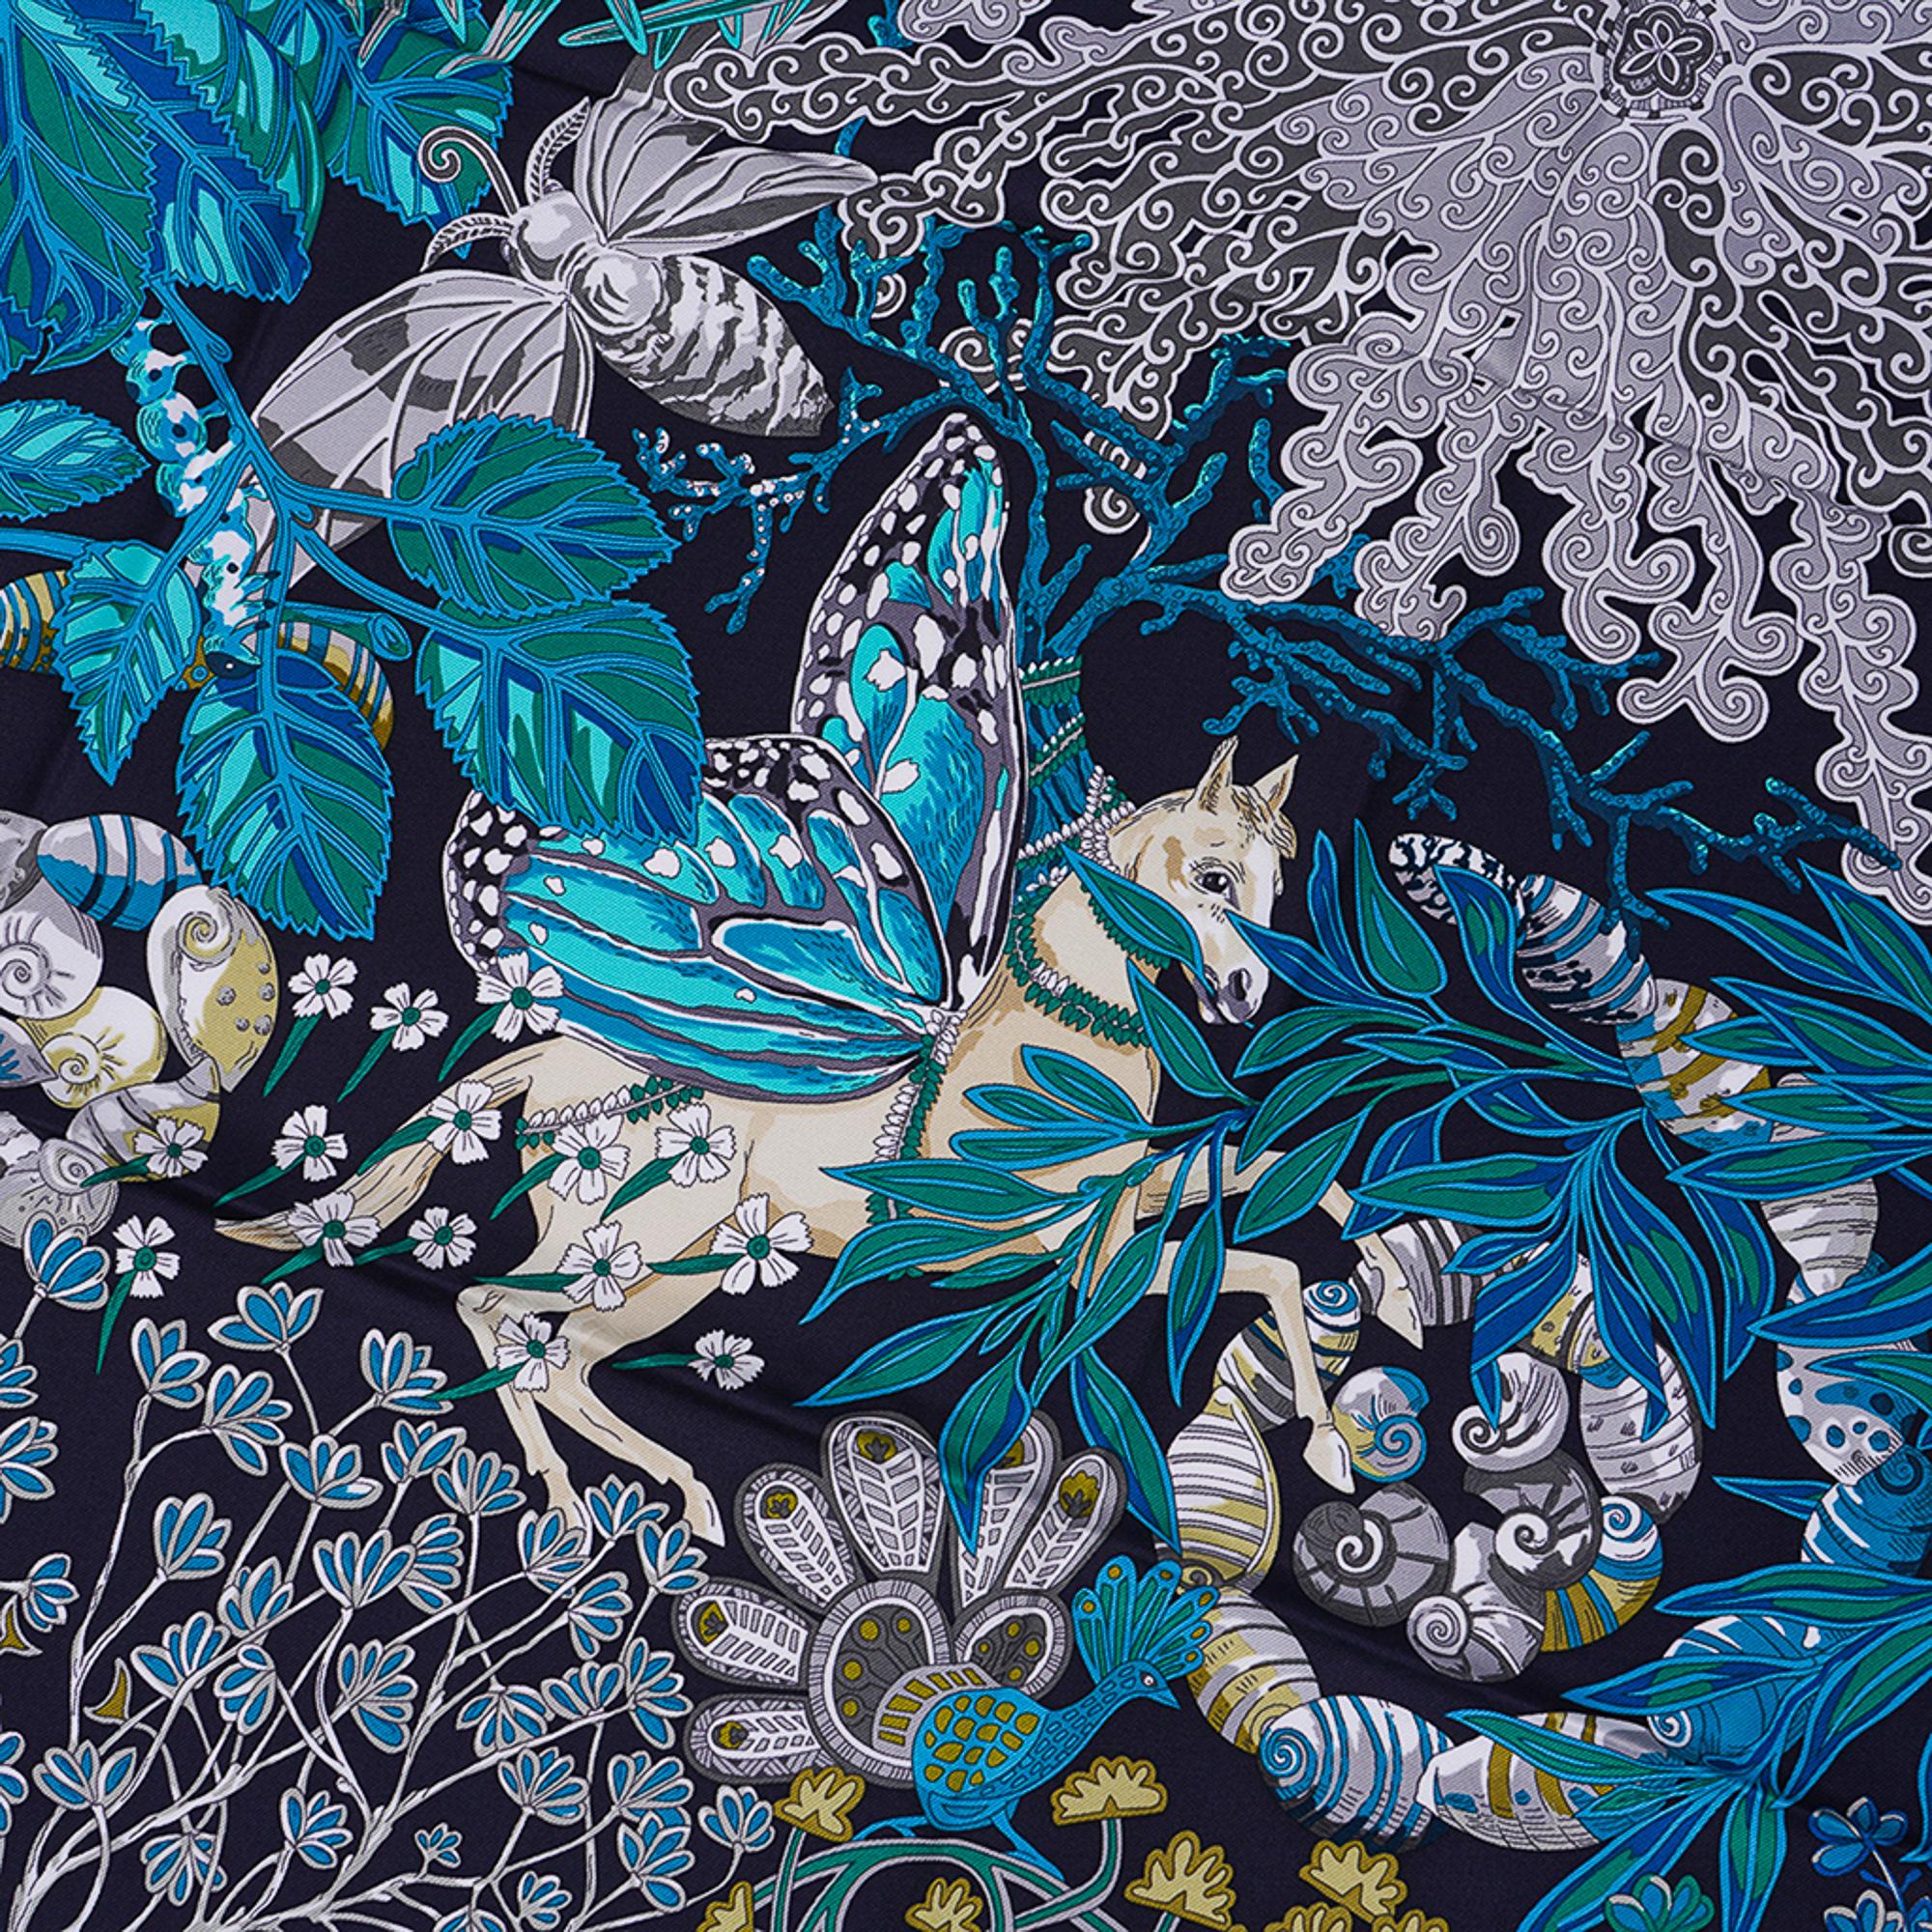 Mightychic offers a rare Hermes Mythes et Metamorphoses silk scarf in rich exotic Marine, Turquoise and Vert.
Designed by Annie Faivre.
Depicts a beautiful blend of animals and tropical florals, some in the Metamorphoses state inspired by Ovid and